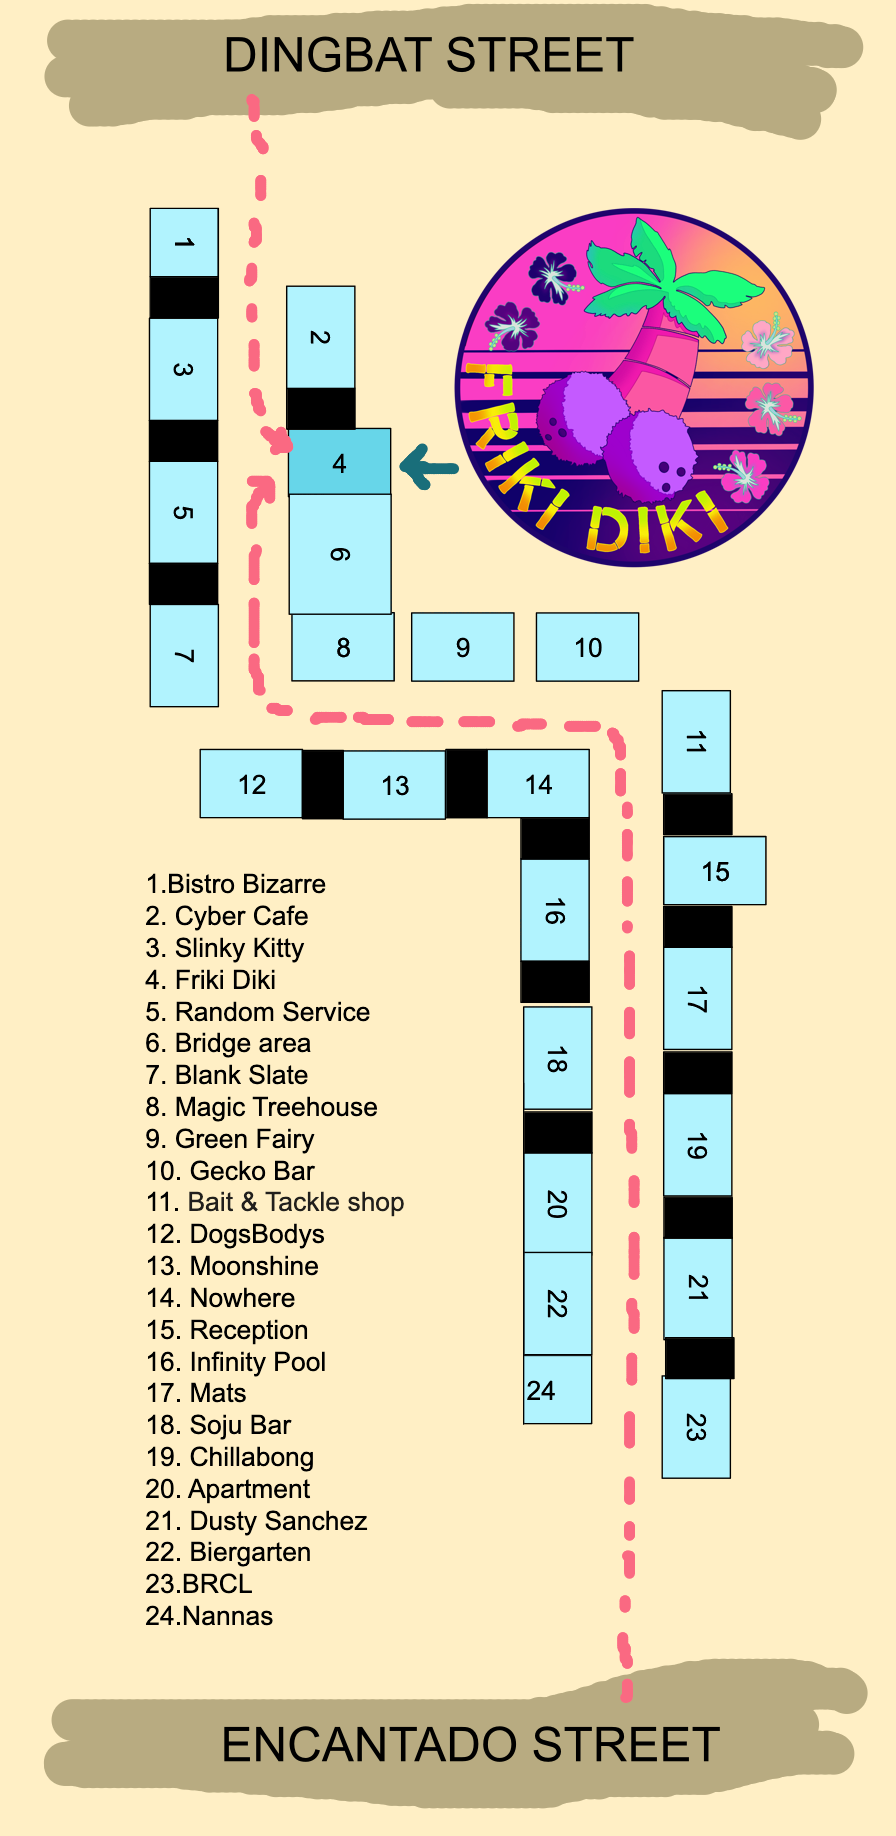 Map to Friki Diki located in Golden Guy Alley at 7:45 & Dingbat